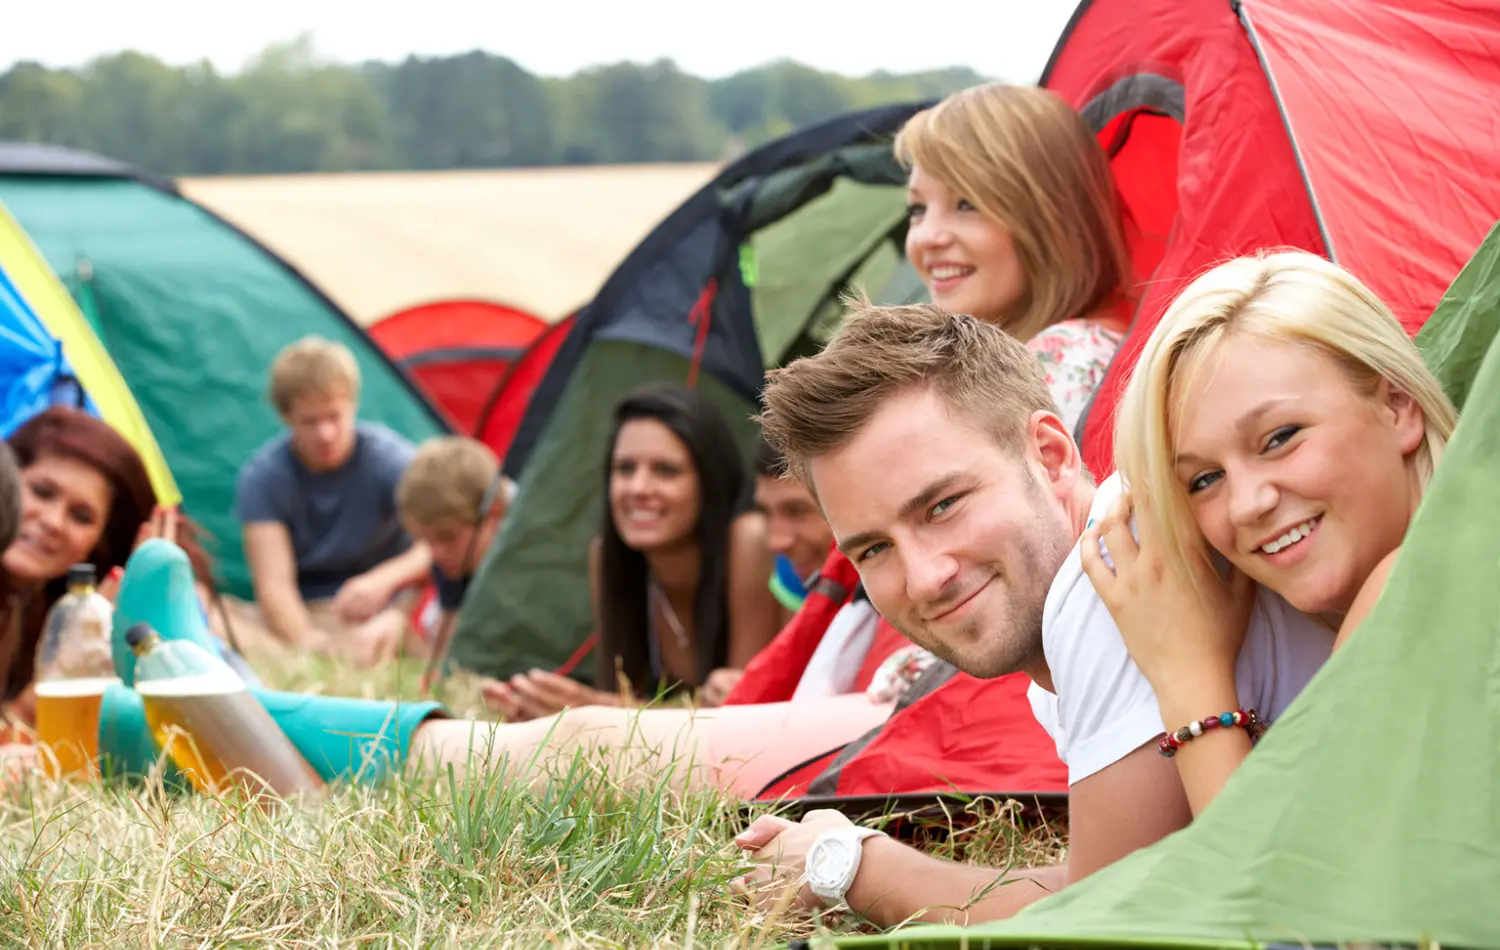 Student Friendly Camping - getting together with friends